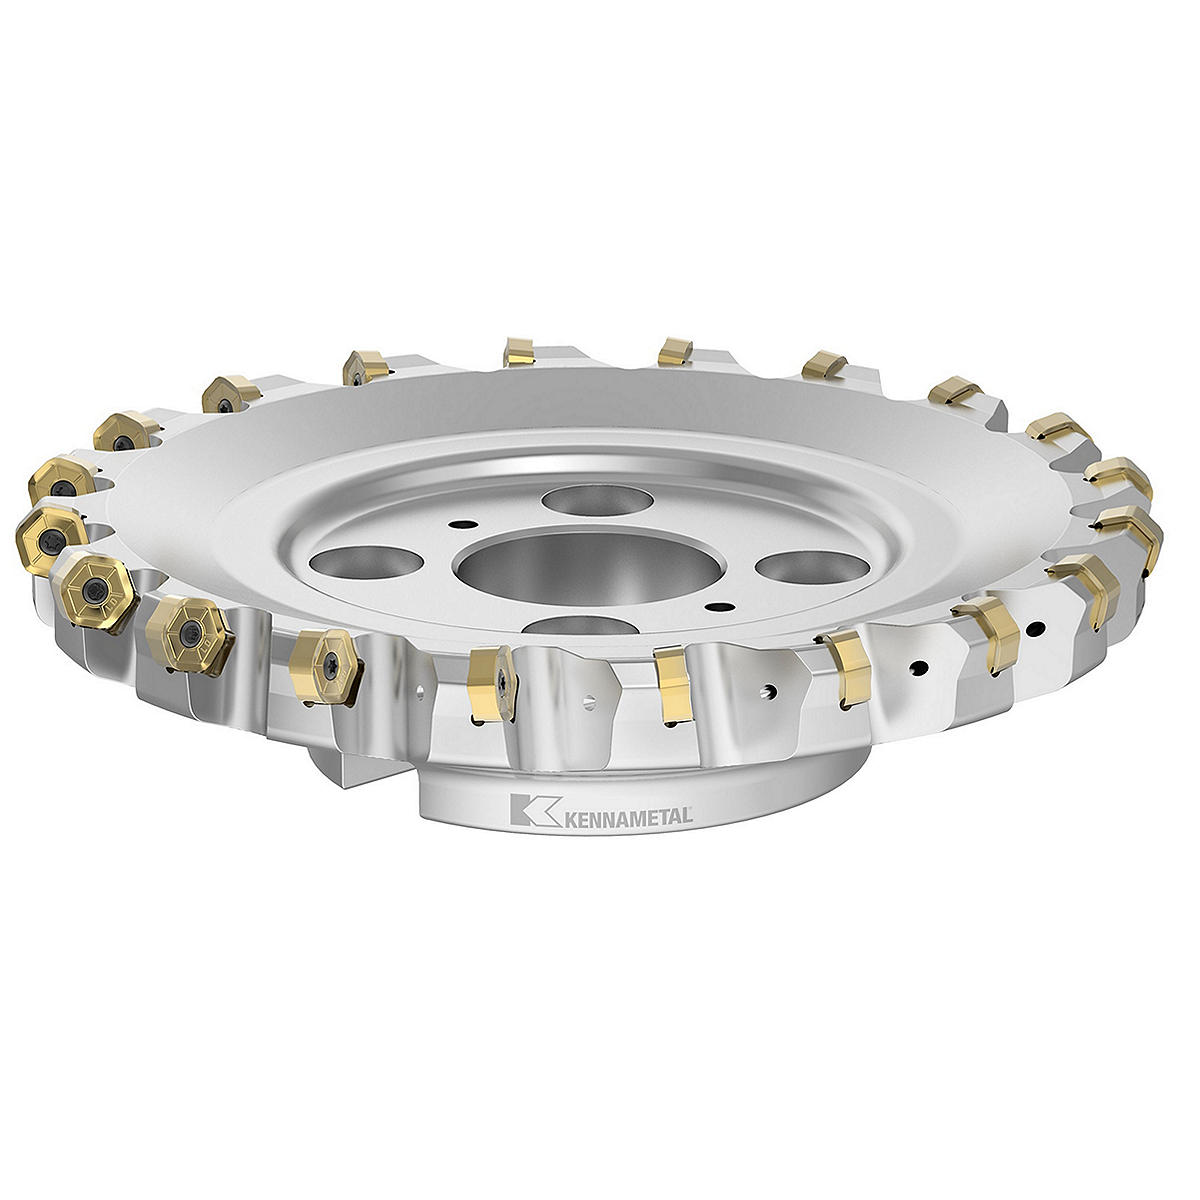 Face milling cutter for multiple materials